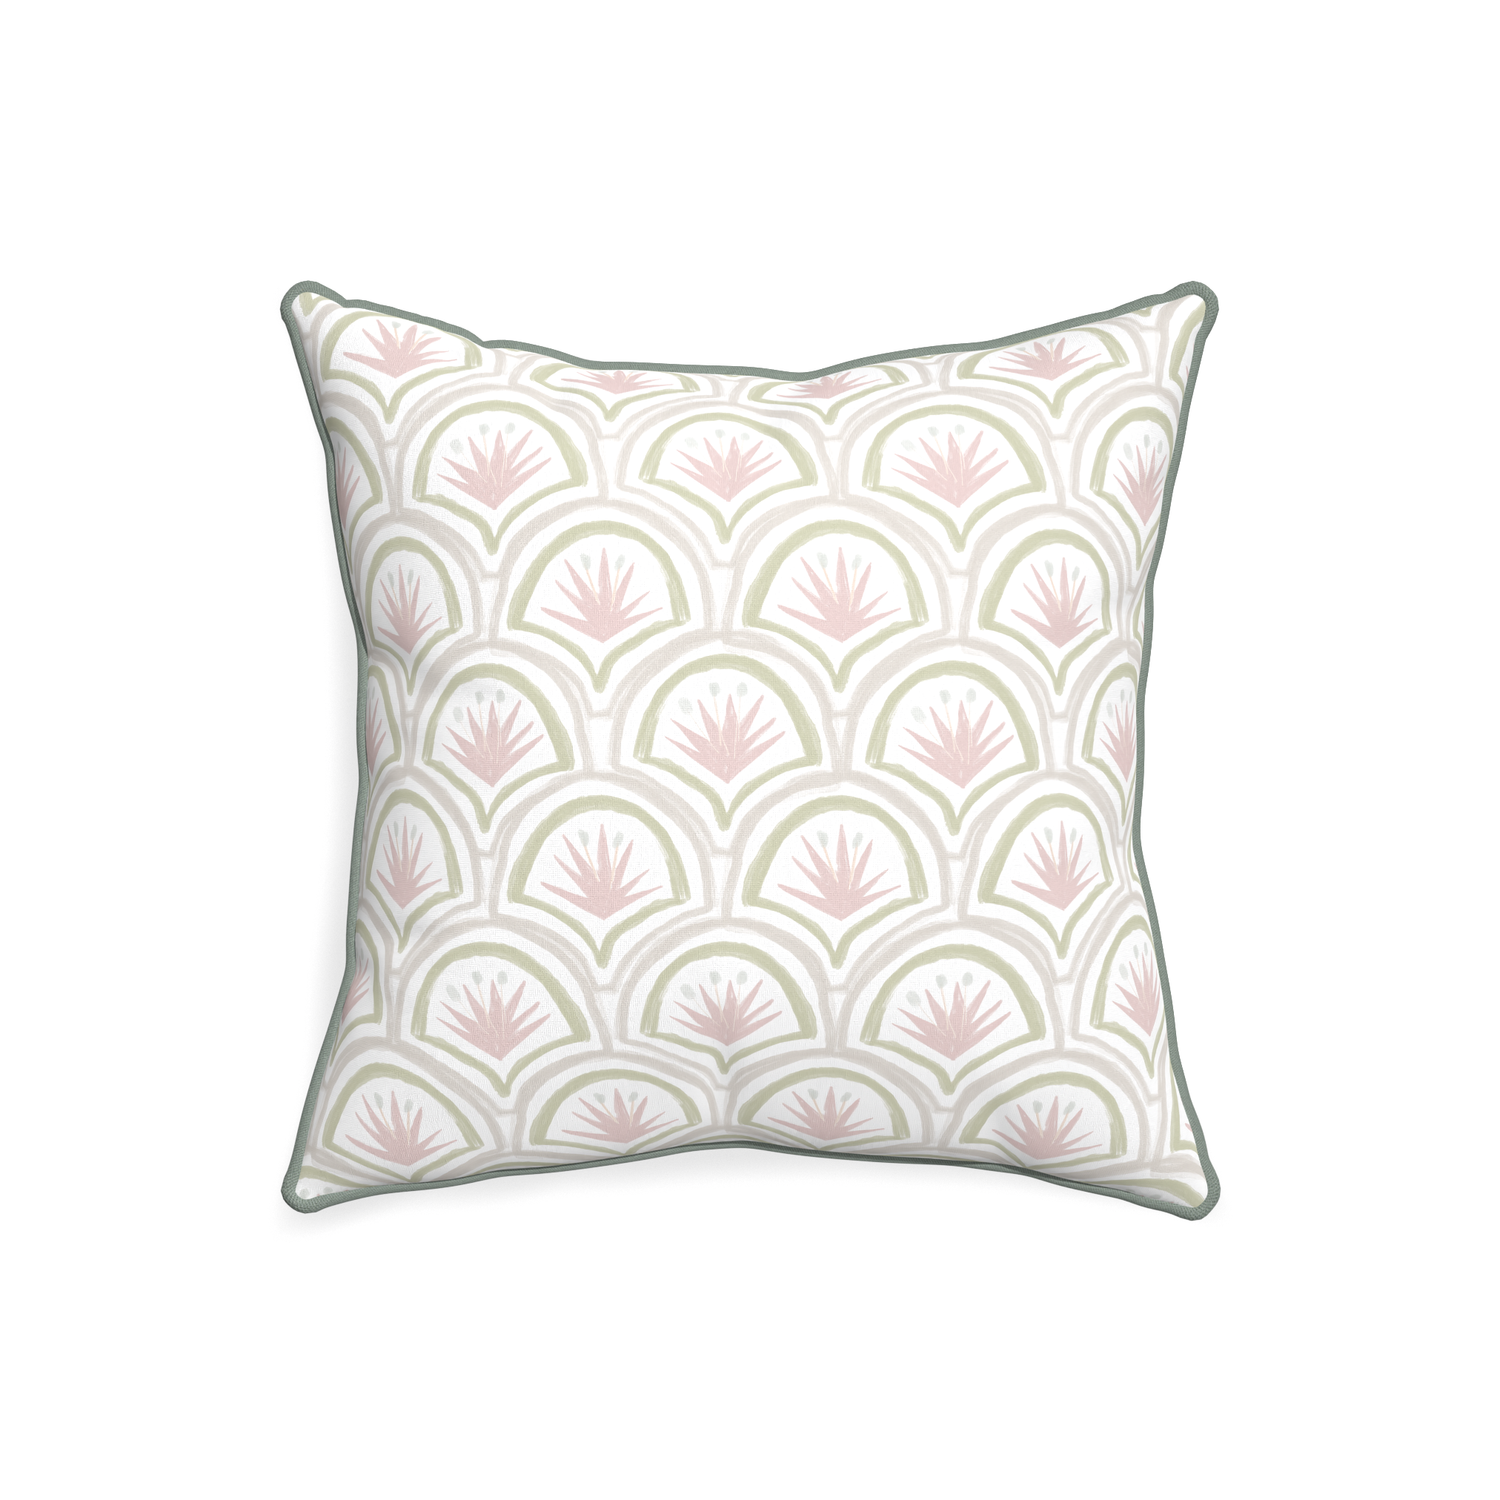 20-square thatcher rose custom pink & green palmpillow with sage piping on white background